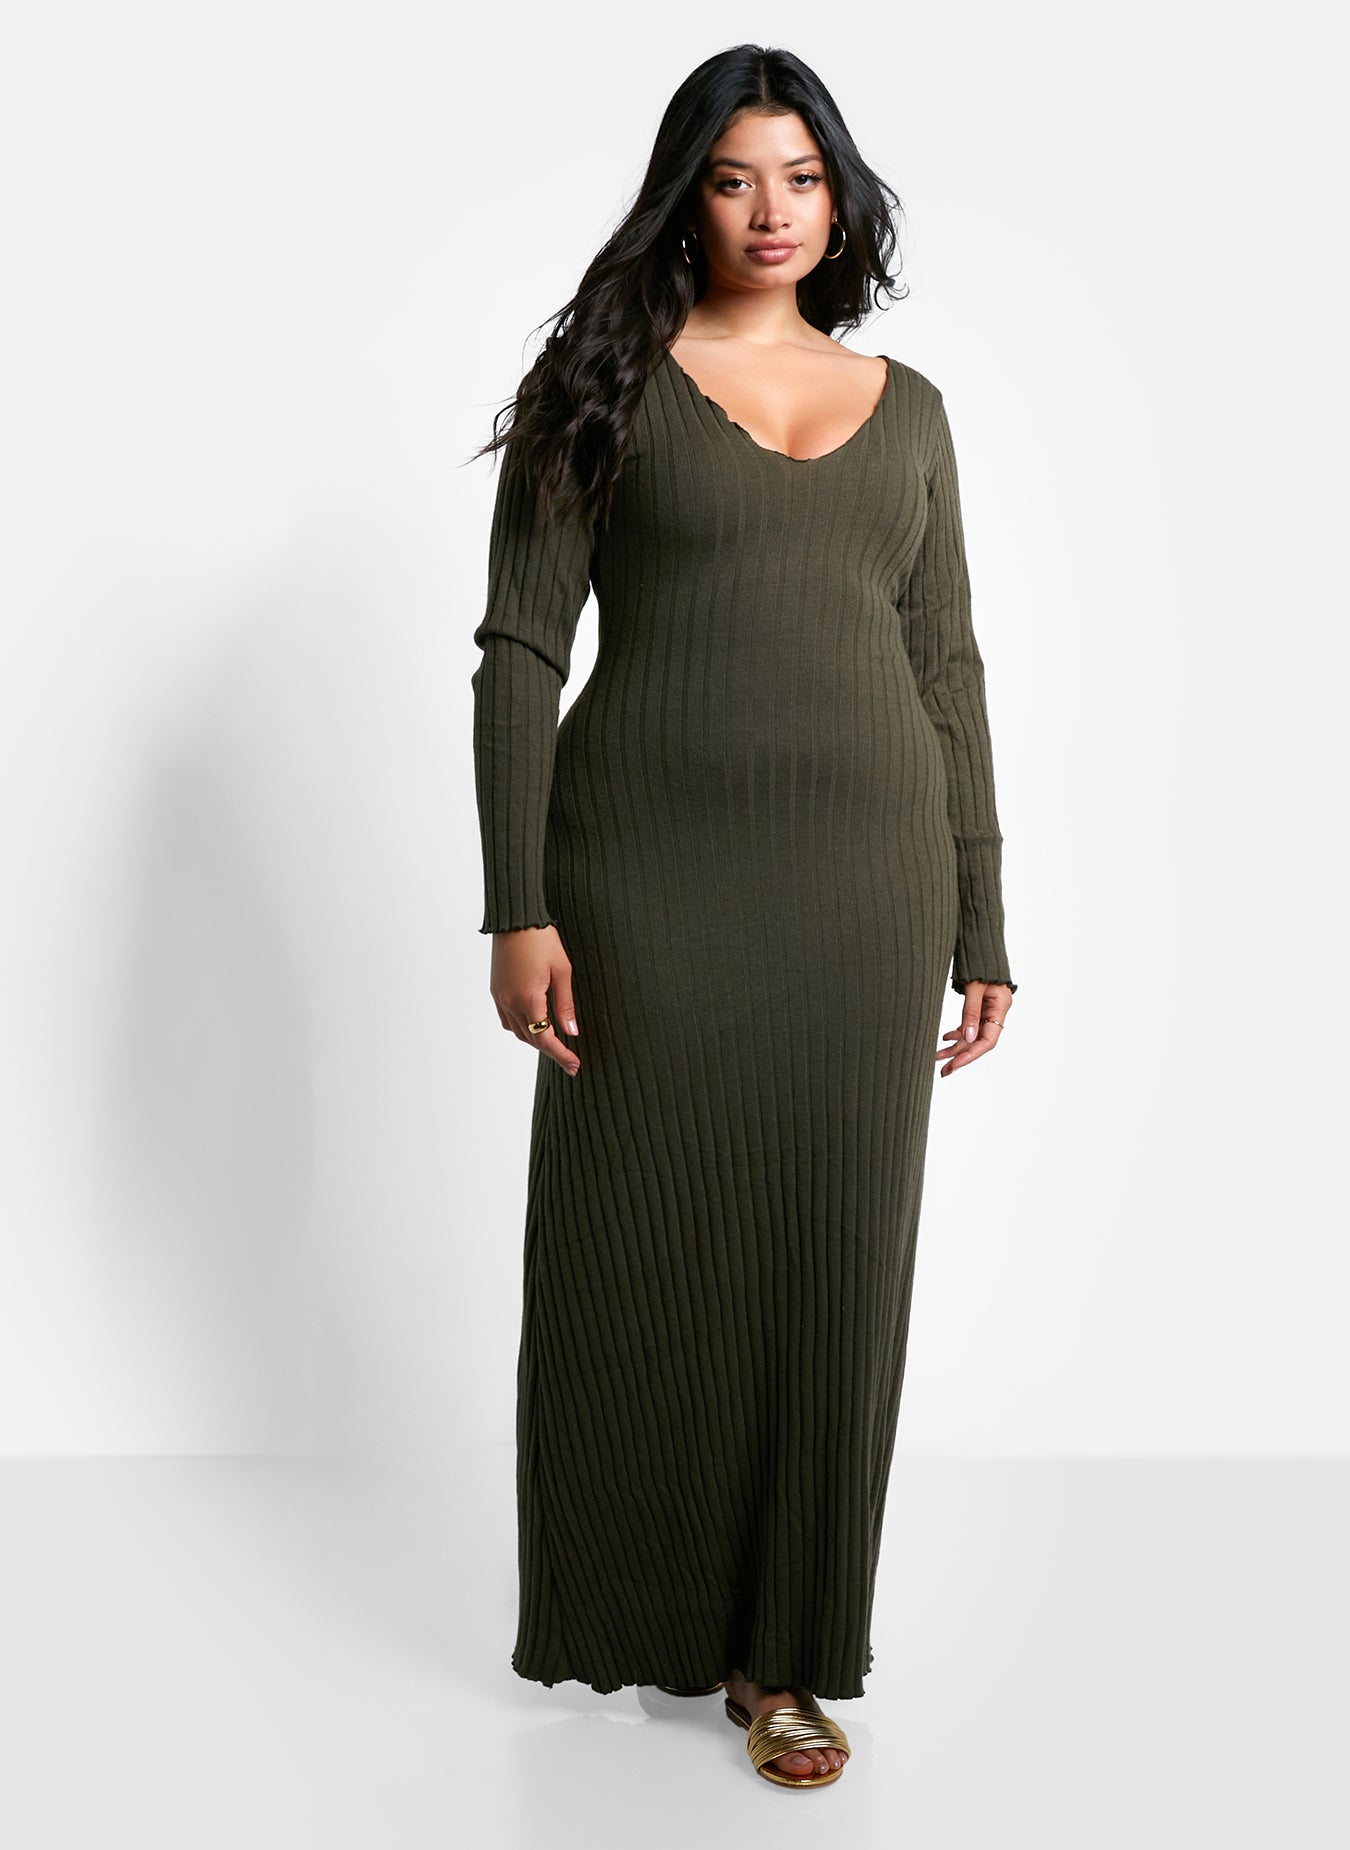 Eloise Ribbed Maxi A Line Dress - Olive Green